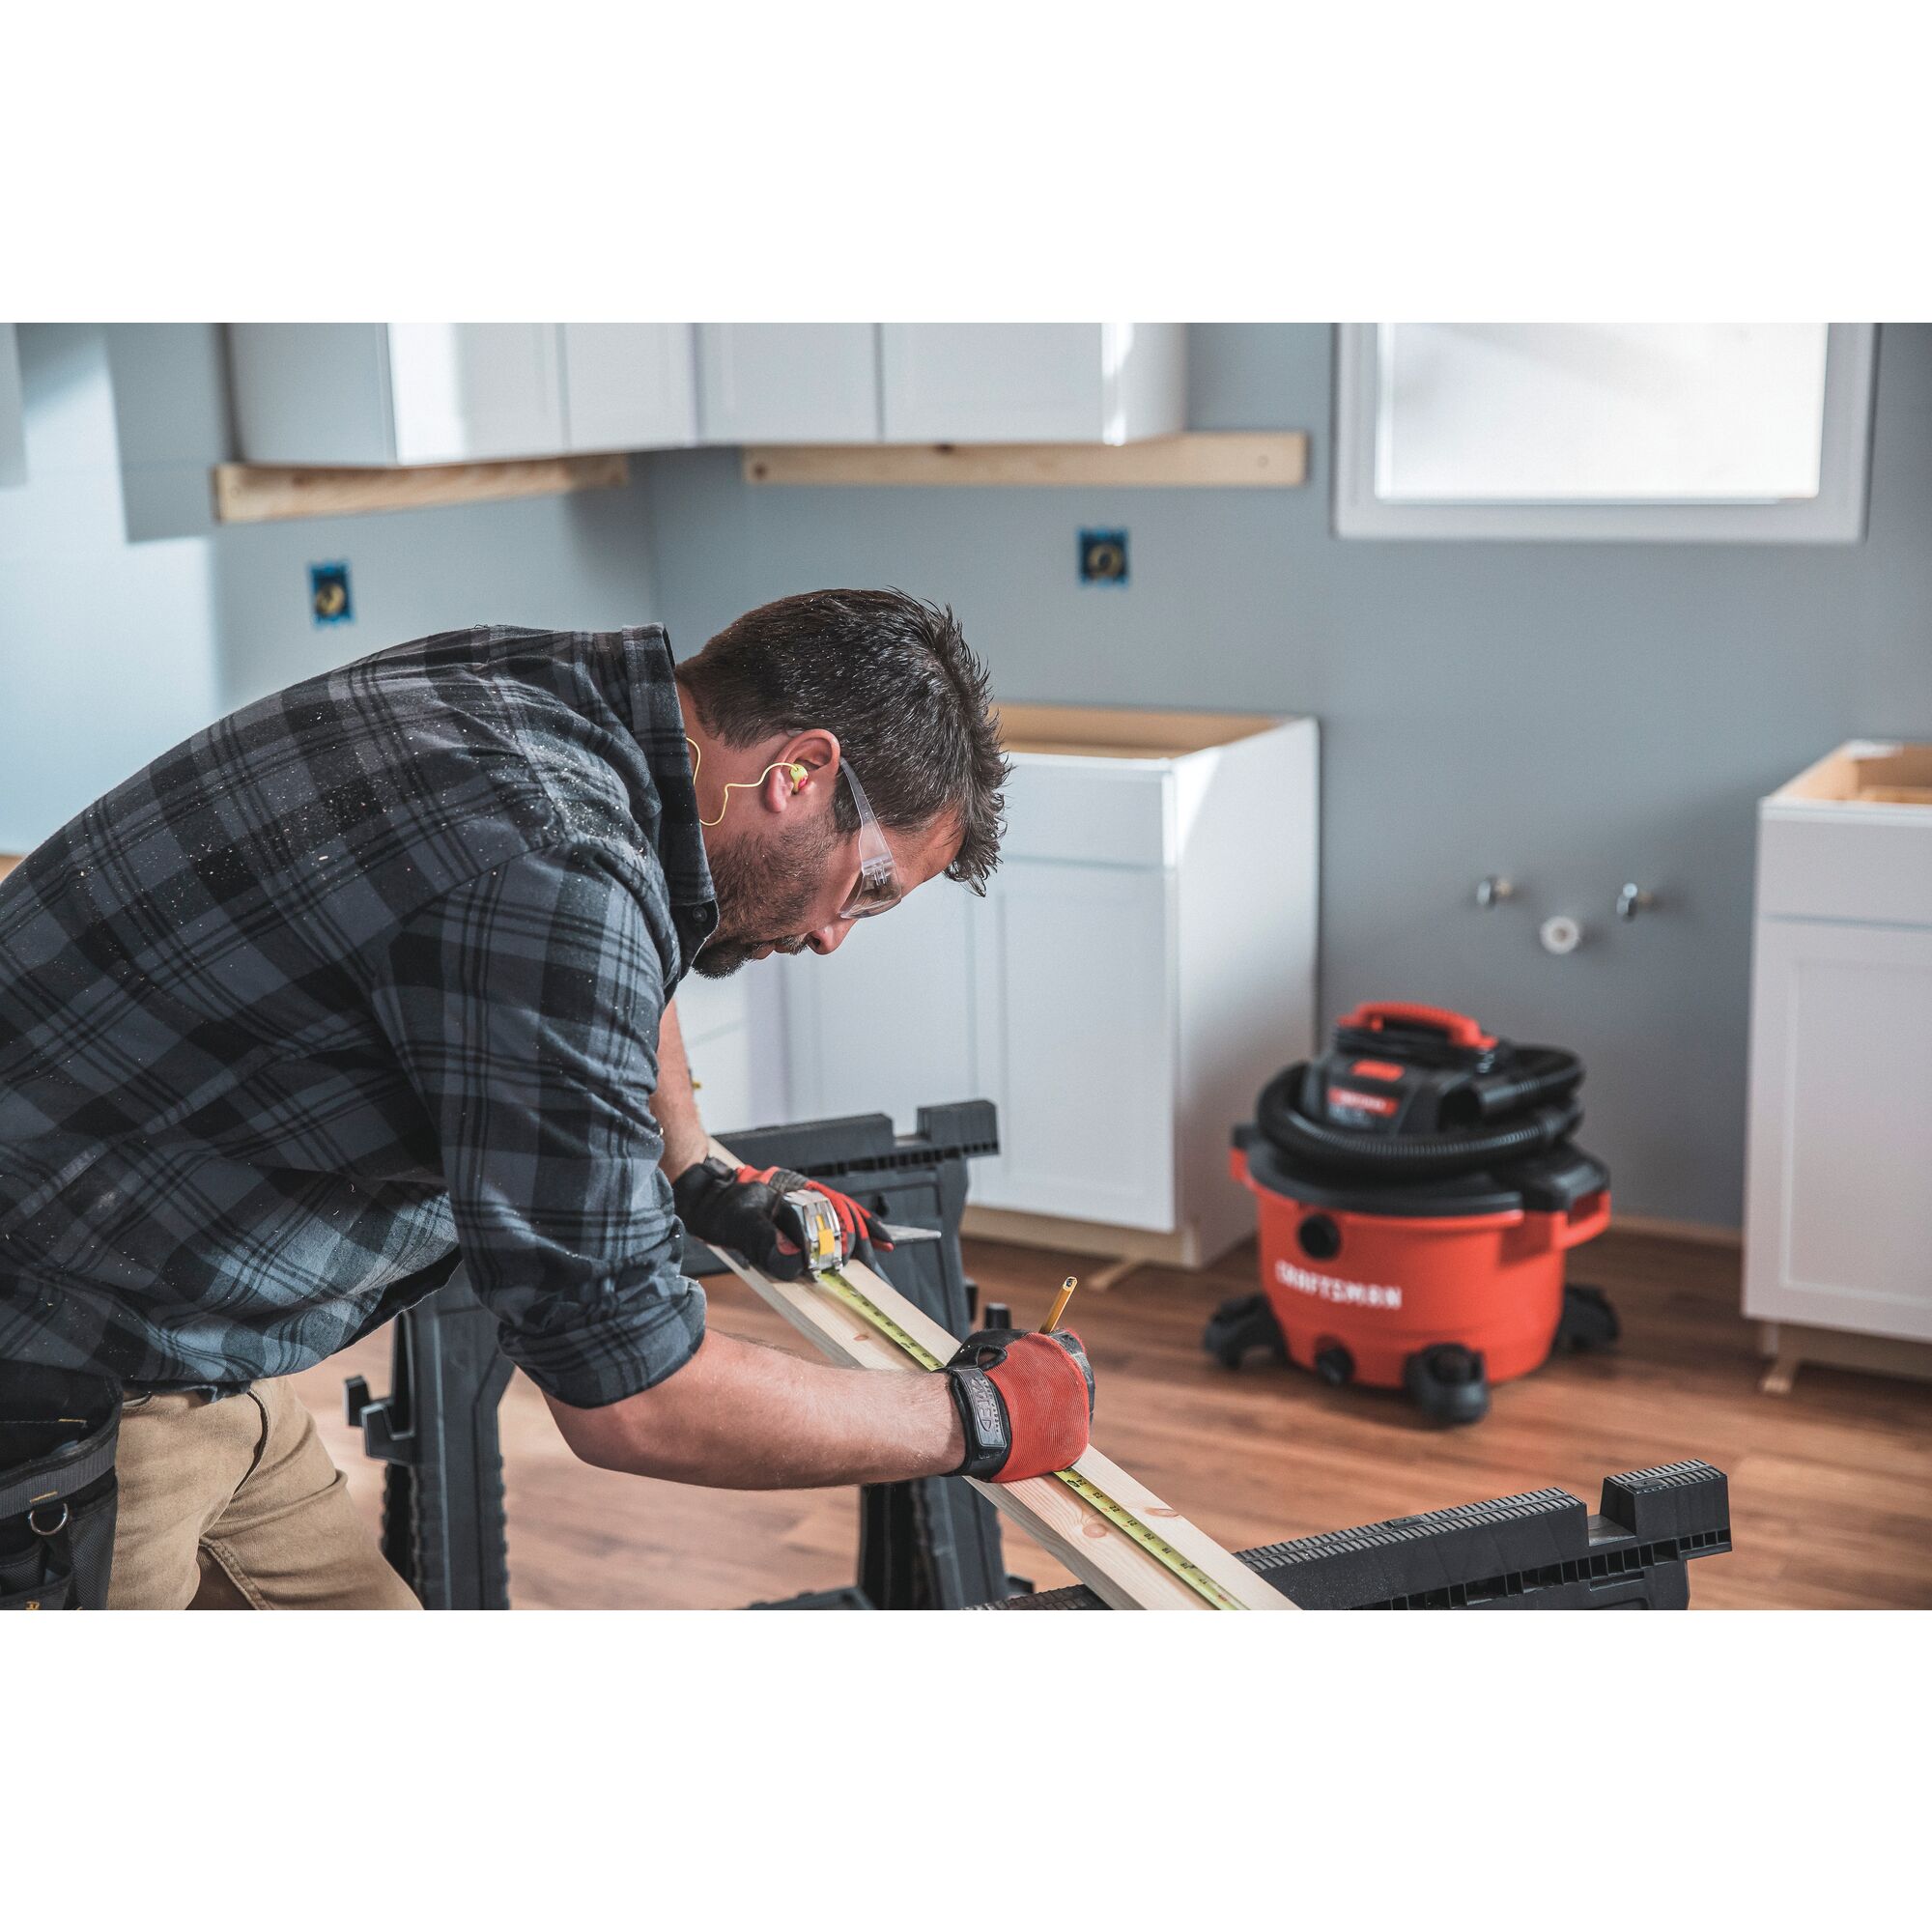 View of CRAFTSMAN Accessories: Vacuums in lifestyle use